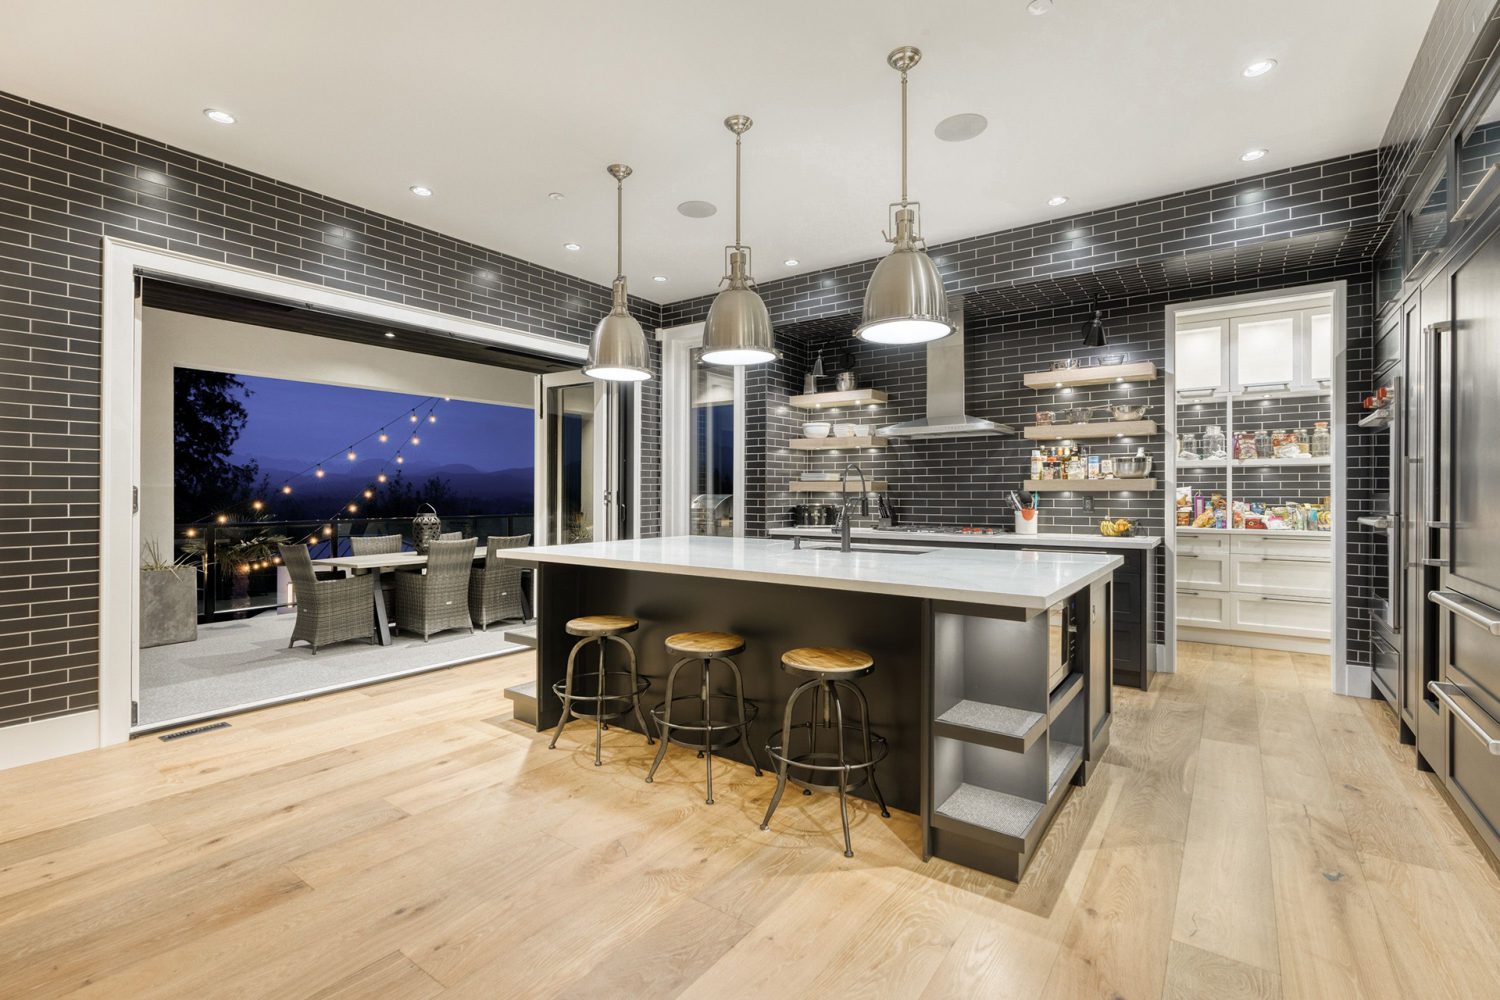 Luxury kitchen and island by Midland Premium Properties in the Greater Vancouver area. 